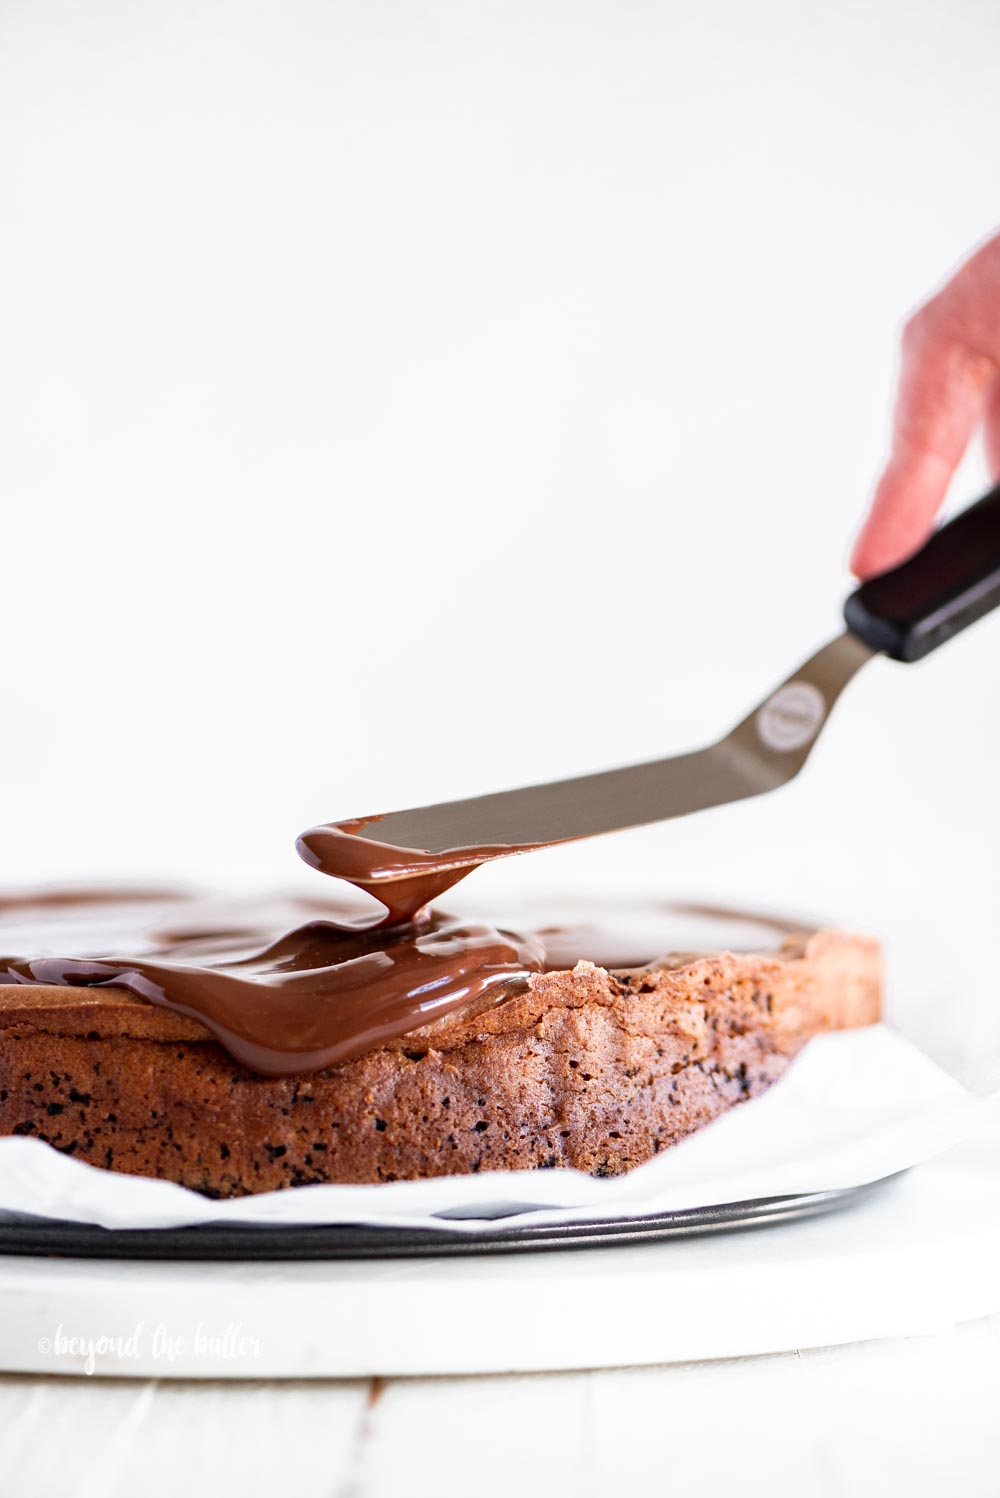 Using an offset spatula to spread out the dark chocolate ganache on top of the Triple Chocolate Mocha Cheesecake | All Images © Beyond the Butter, LLC